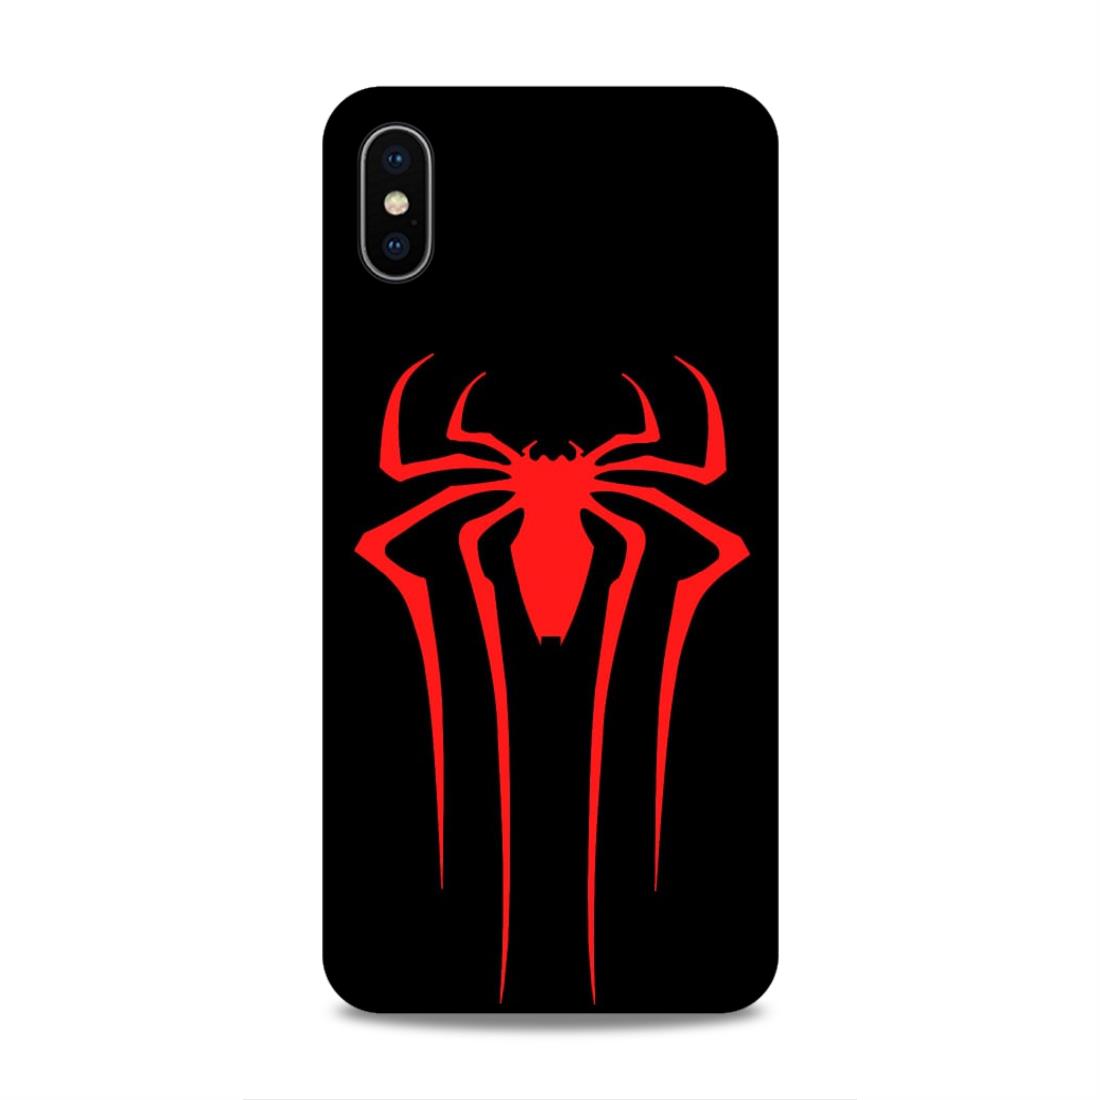 Spiderman Symbol Hard Back Case For Apple iPhone XS Max